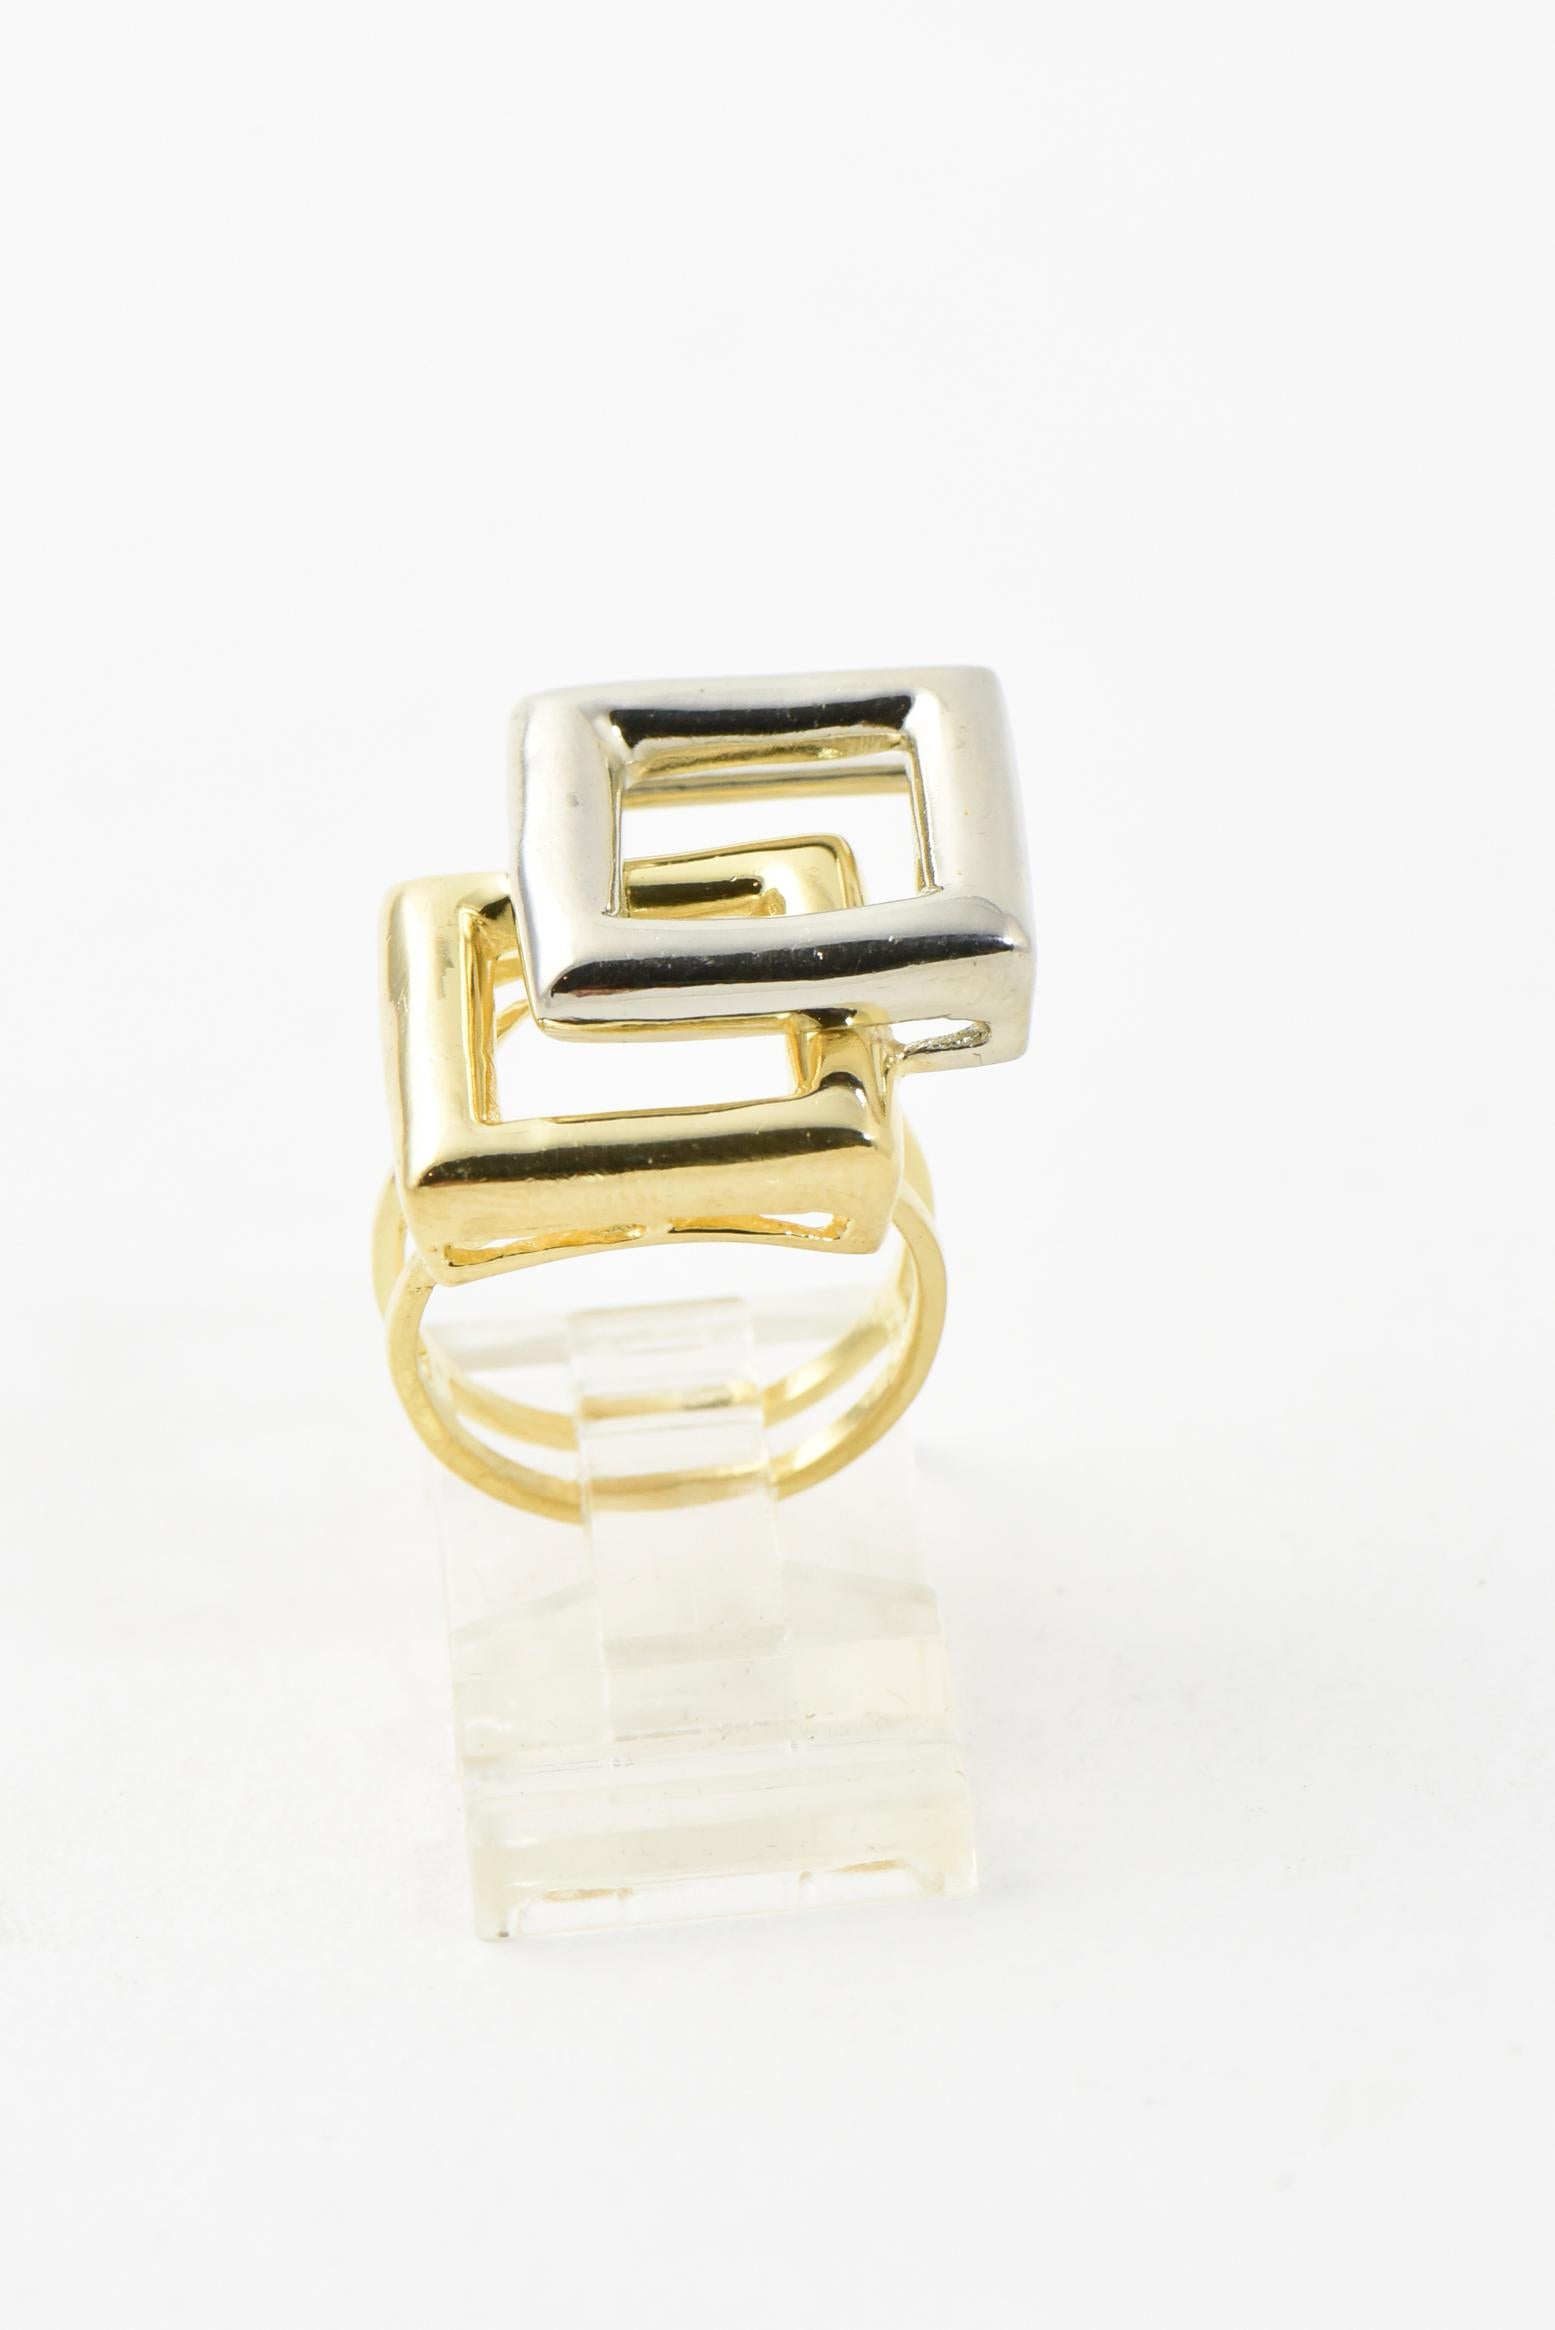 Mid 20th Century Geometric White and Yellow Square Gold Ring In Good Condition For Sale In Miami Beach, FL